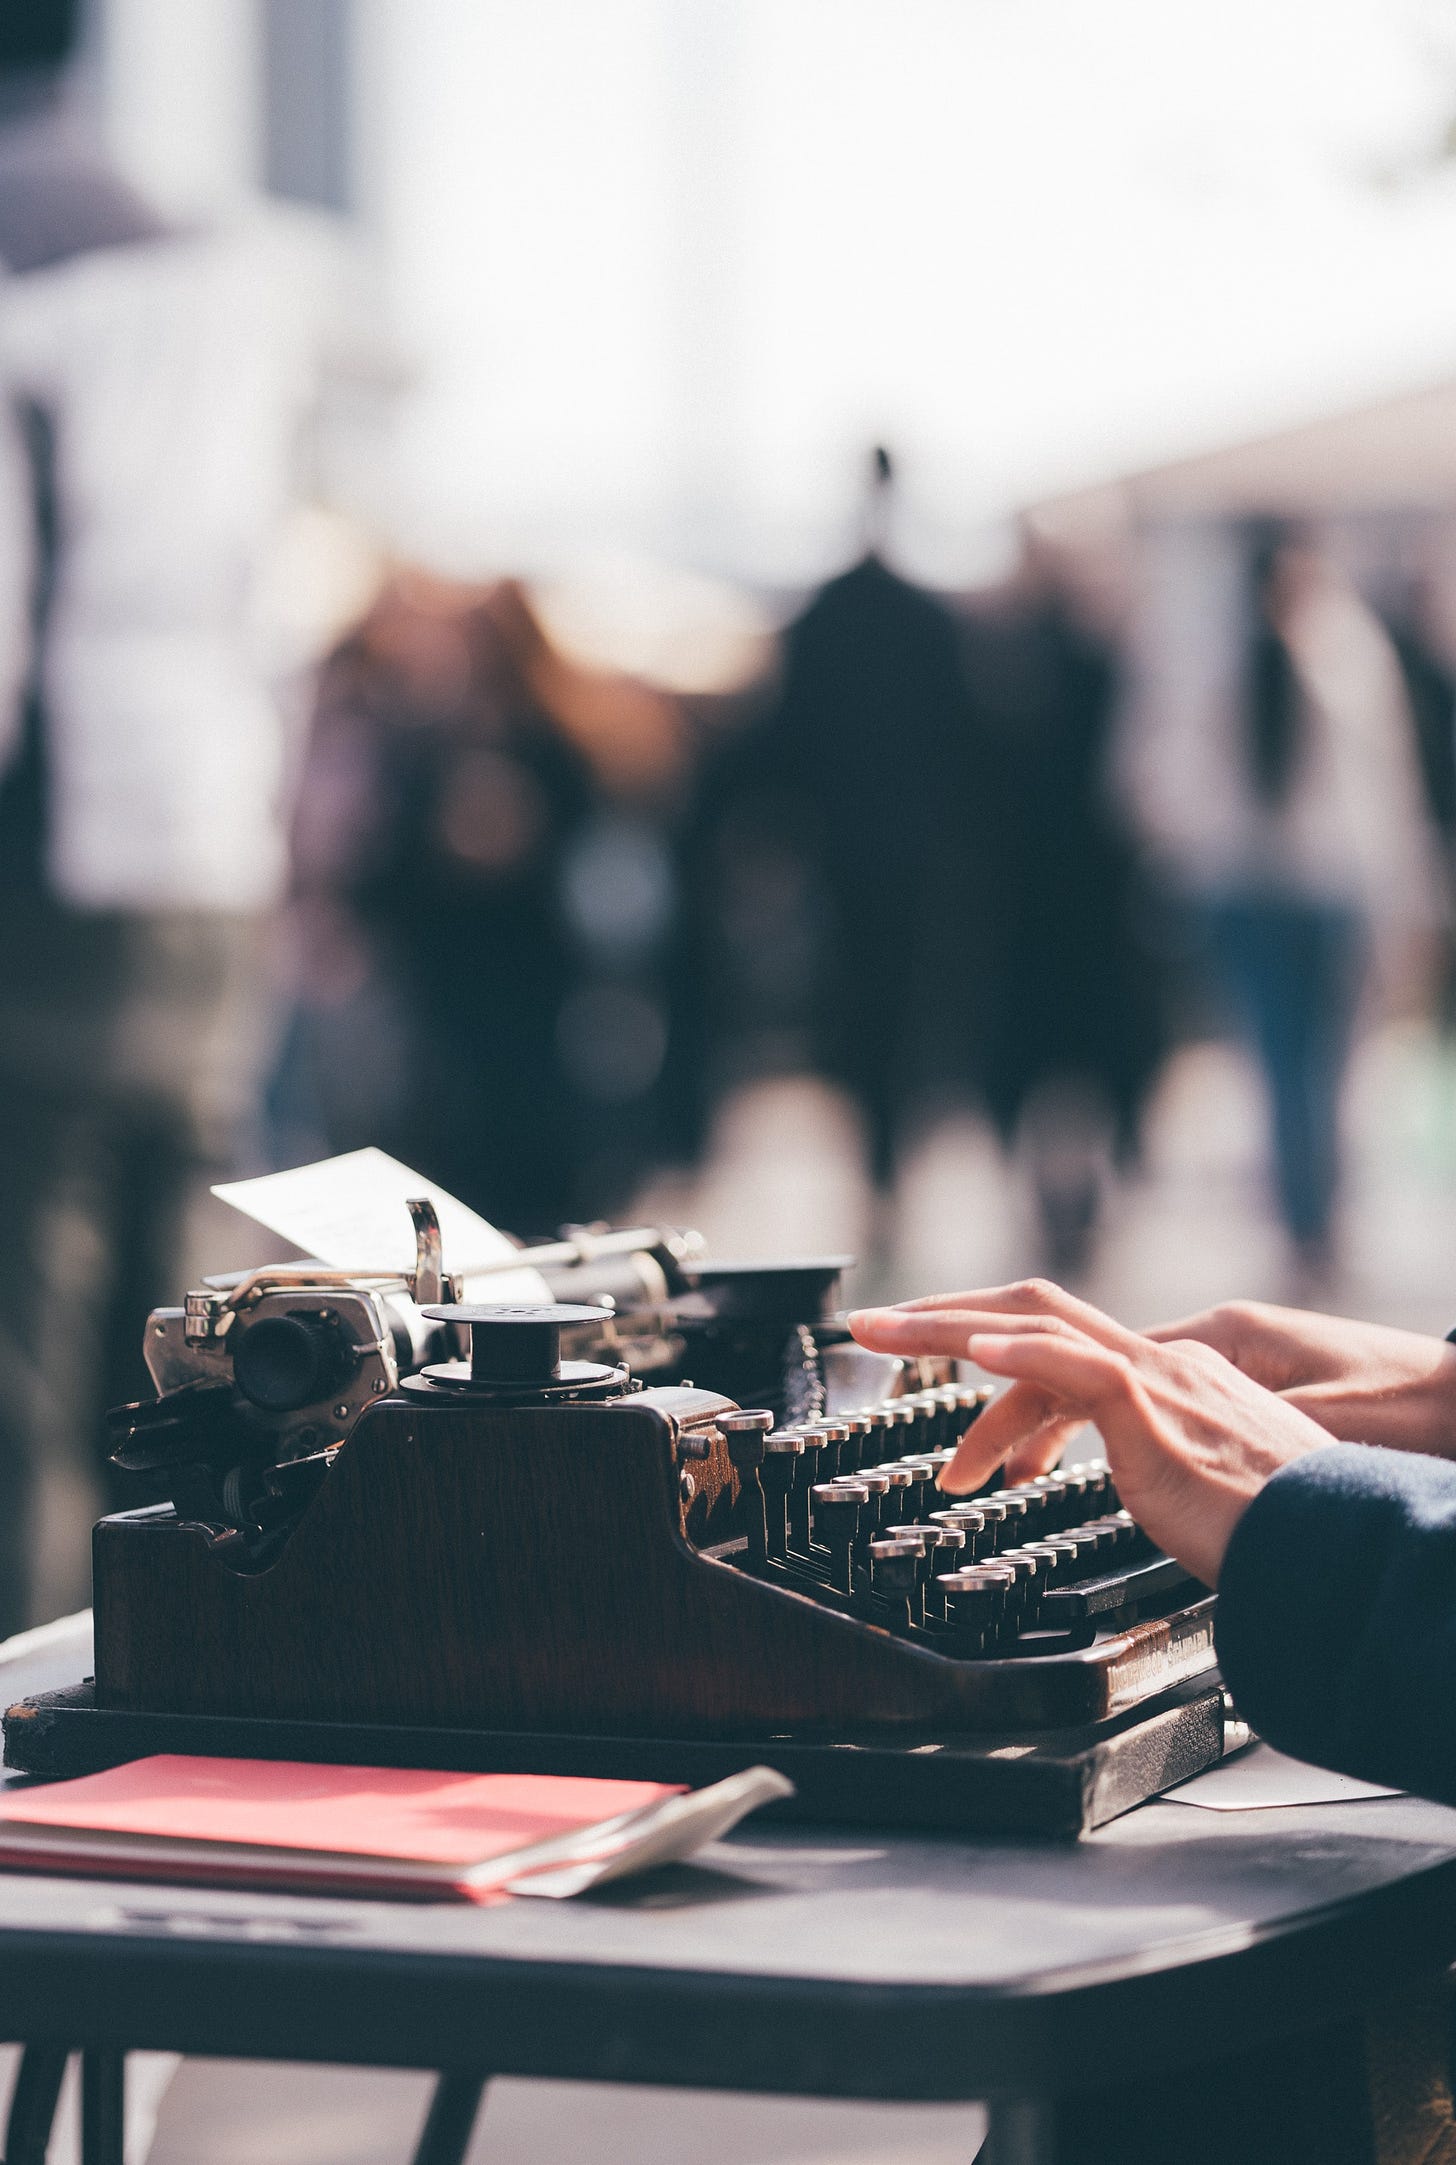 Image of hands typing on an old fashioned typewriter with a blurred background, free from Upsplash